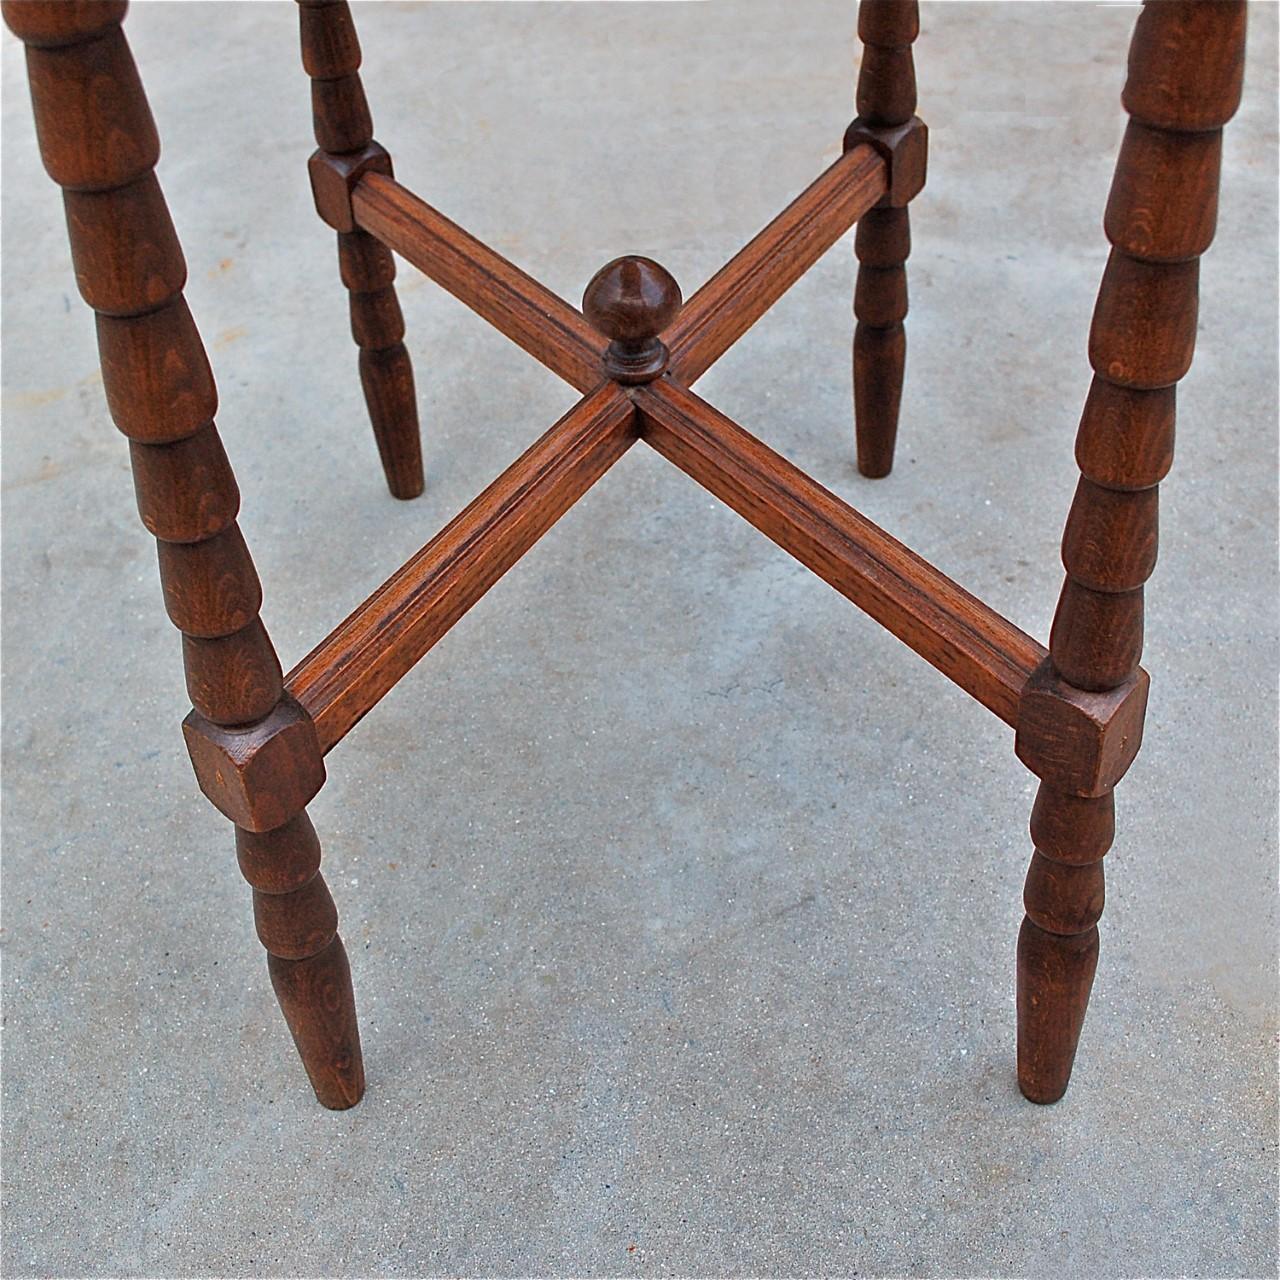 Country Style Side Table, Early 20th Century (20. Jahrhundert) im Angebot